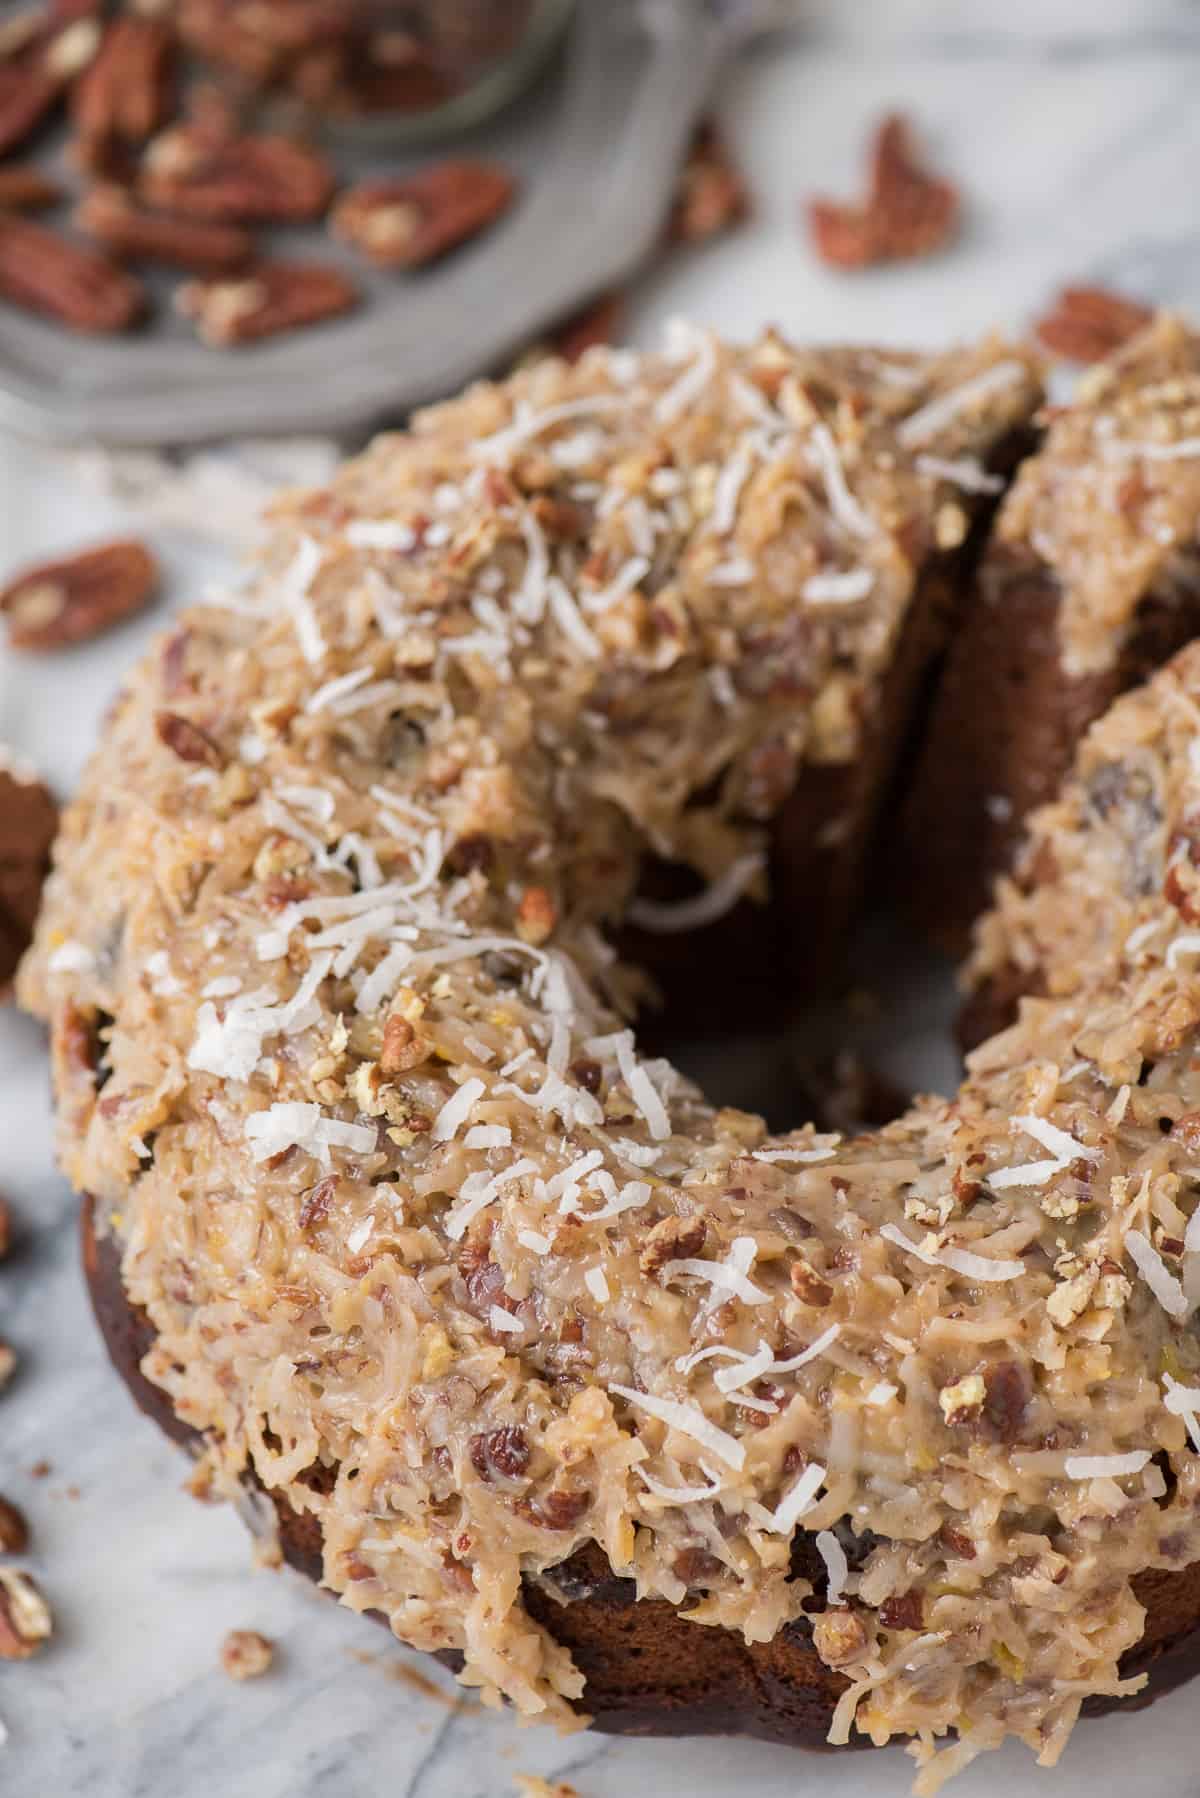 Rich and chocolatey german chocolate bundt cake with classic german chocolate frosting! We’ll show you how to make that classic coconut pecan frosting!